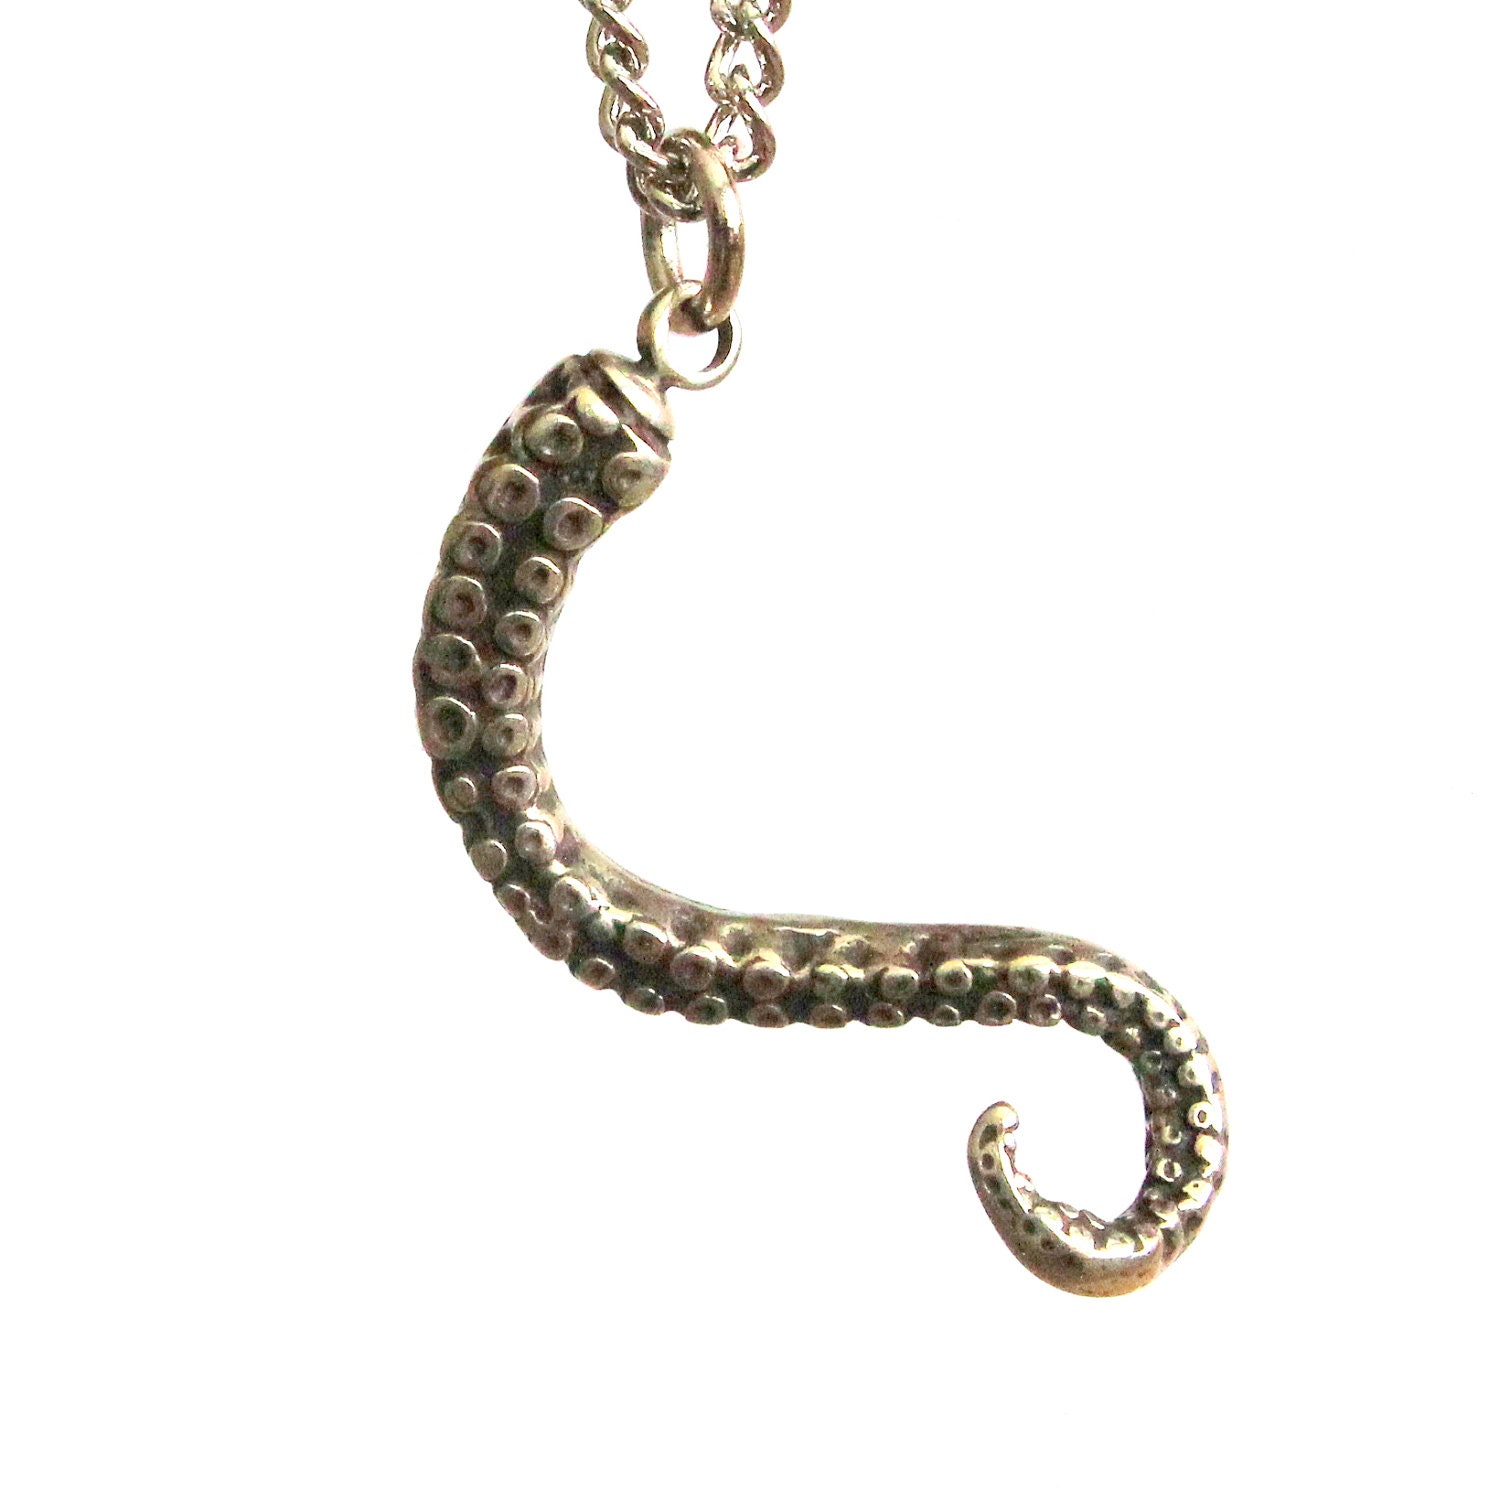 Octopus Tentacle Necklace in Sterling Silver Overlay on Solid White Bronze - mrd74